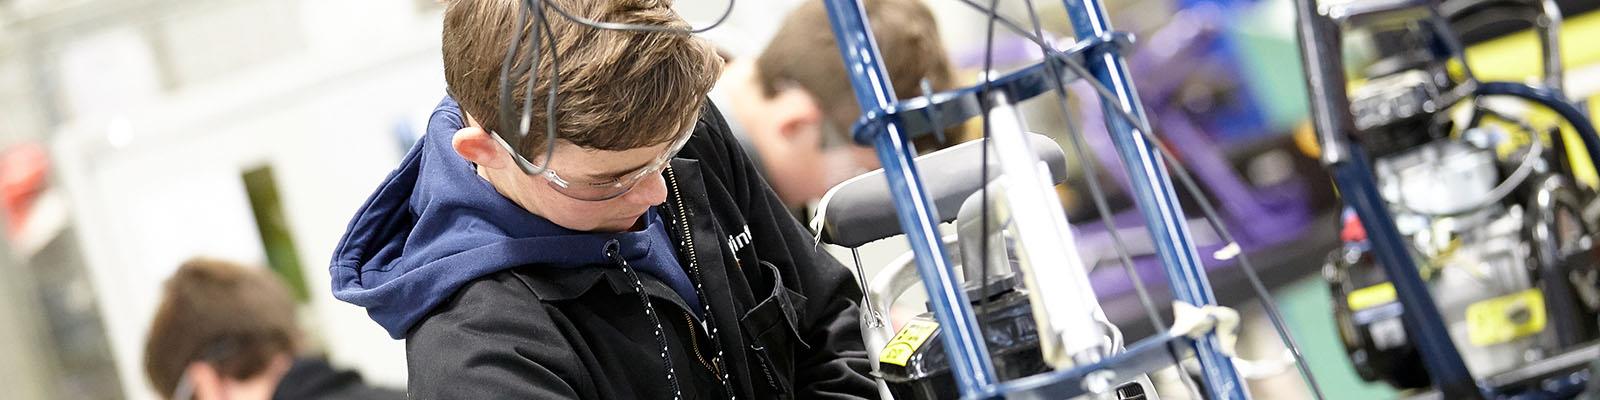 Waikato Trades Academy student in the workshop at Wintec